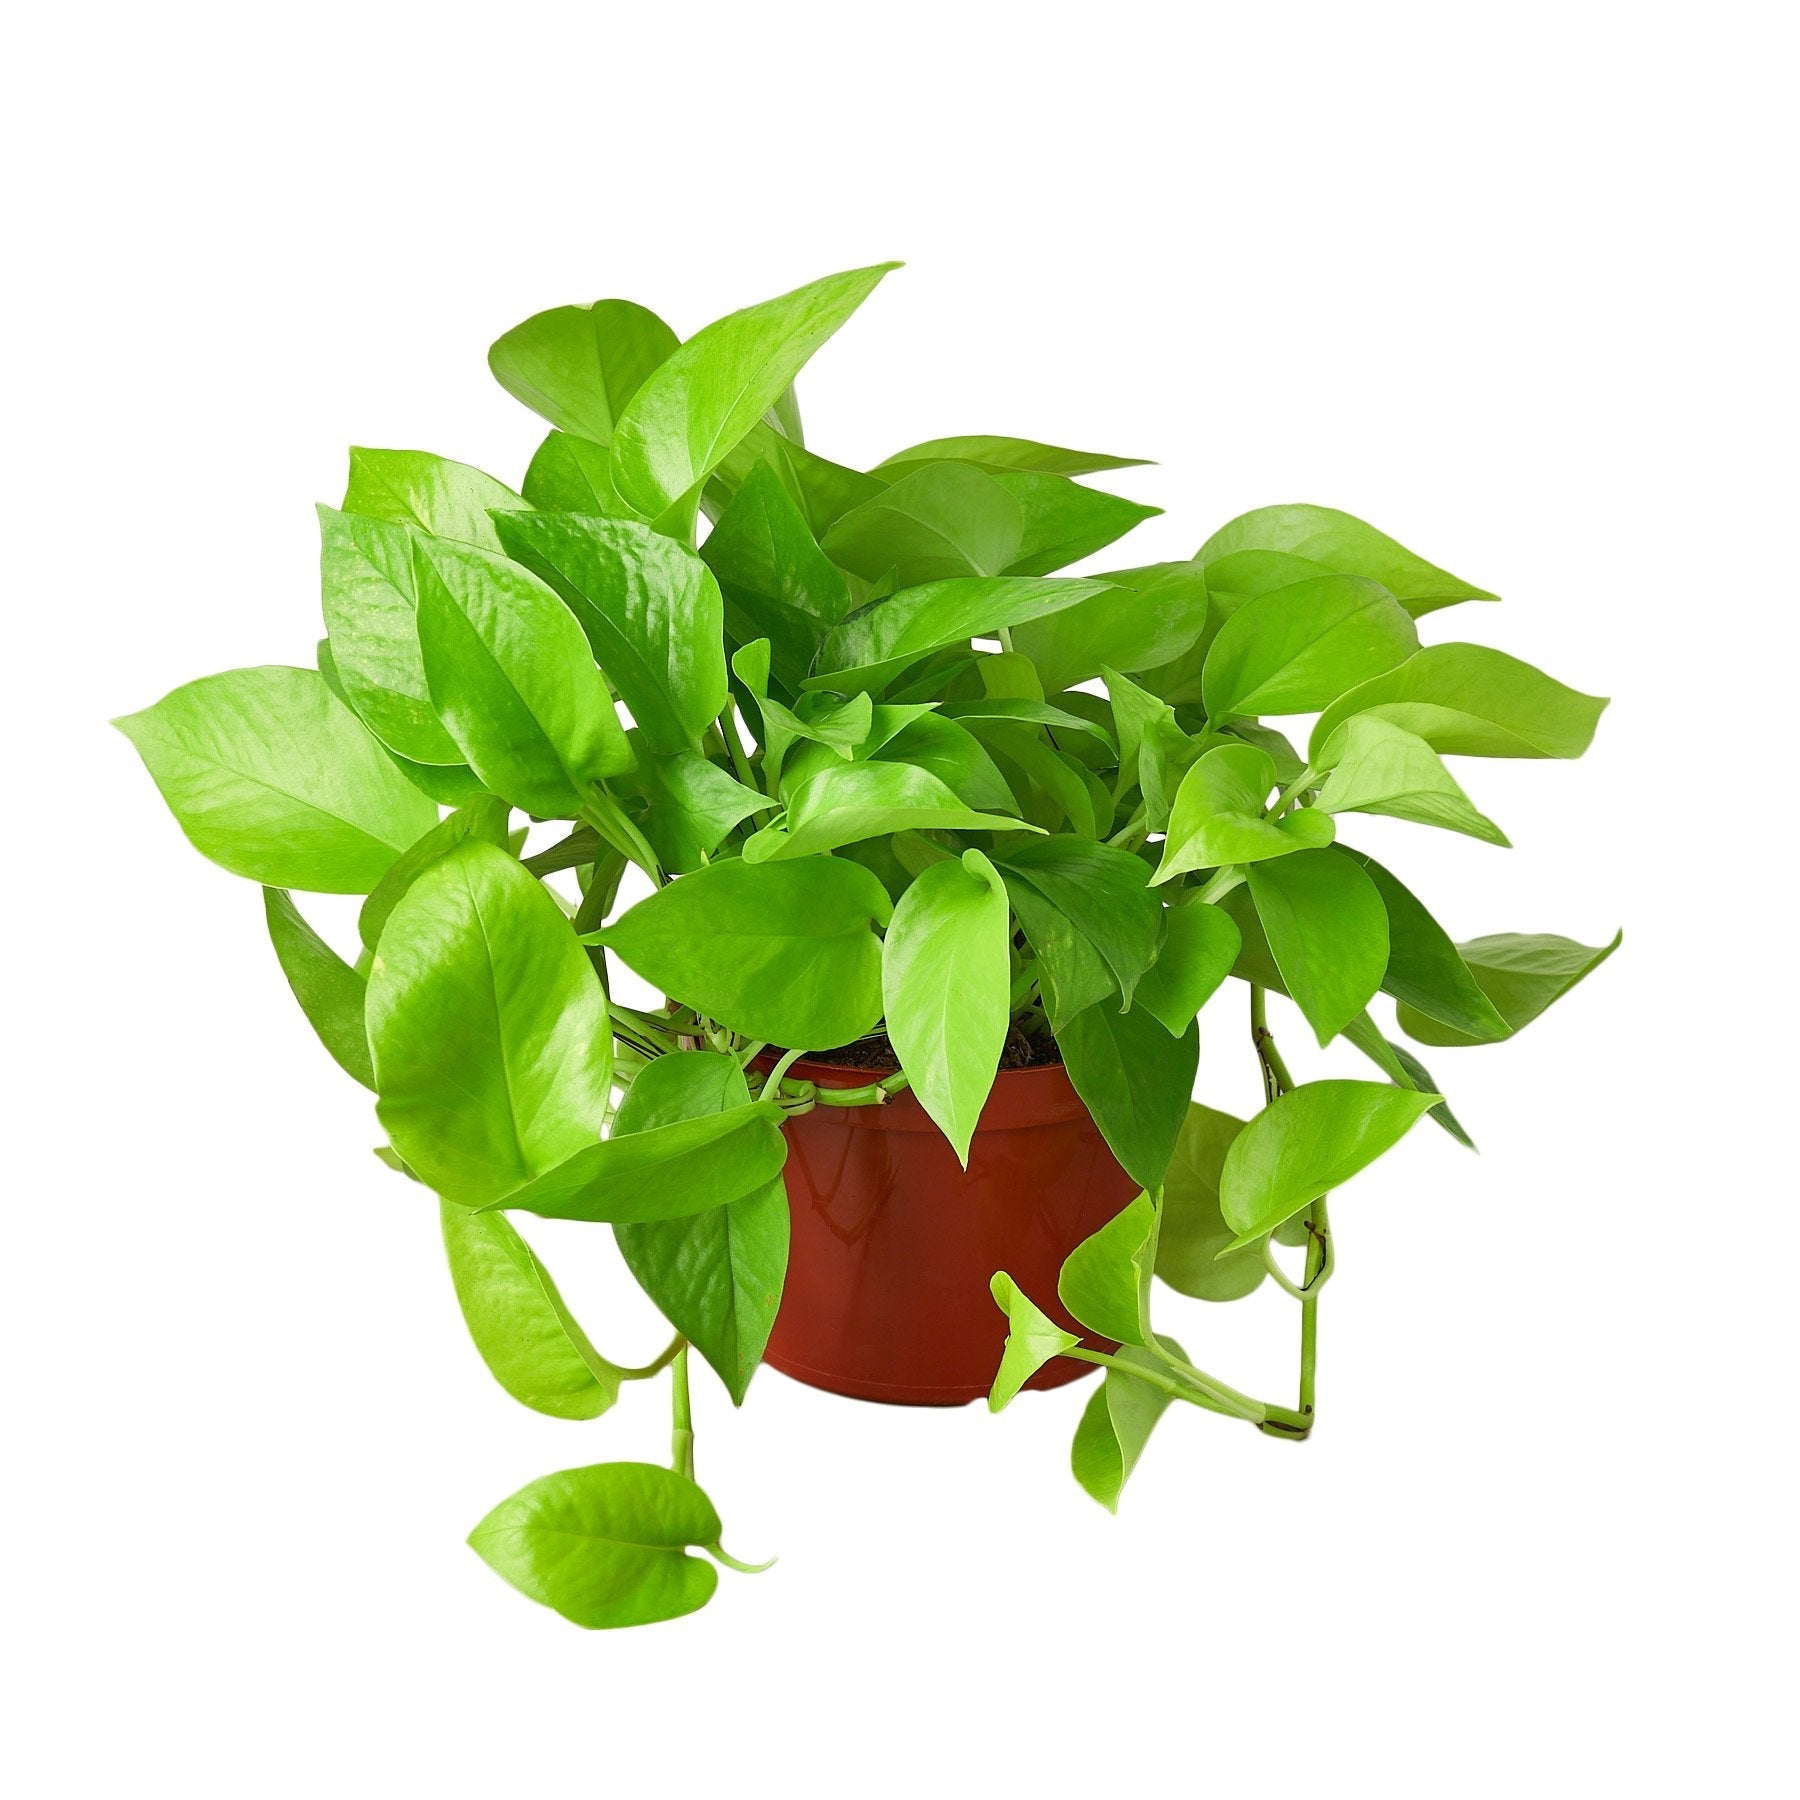 A green plant in a pot on a white background available at a nearby nursery.